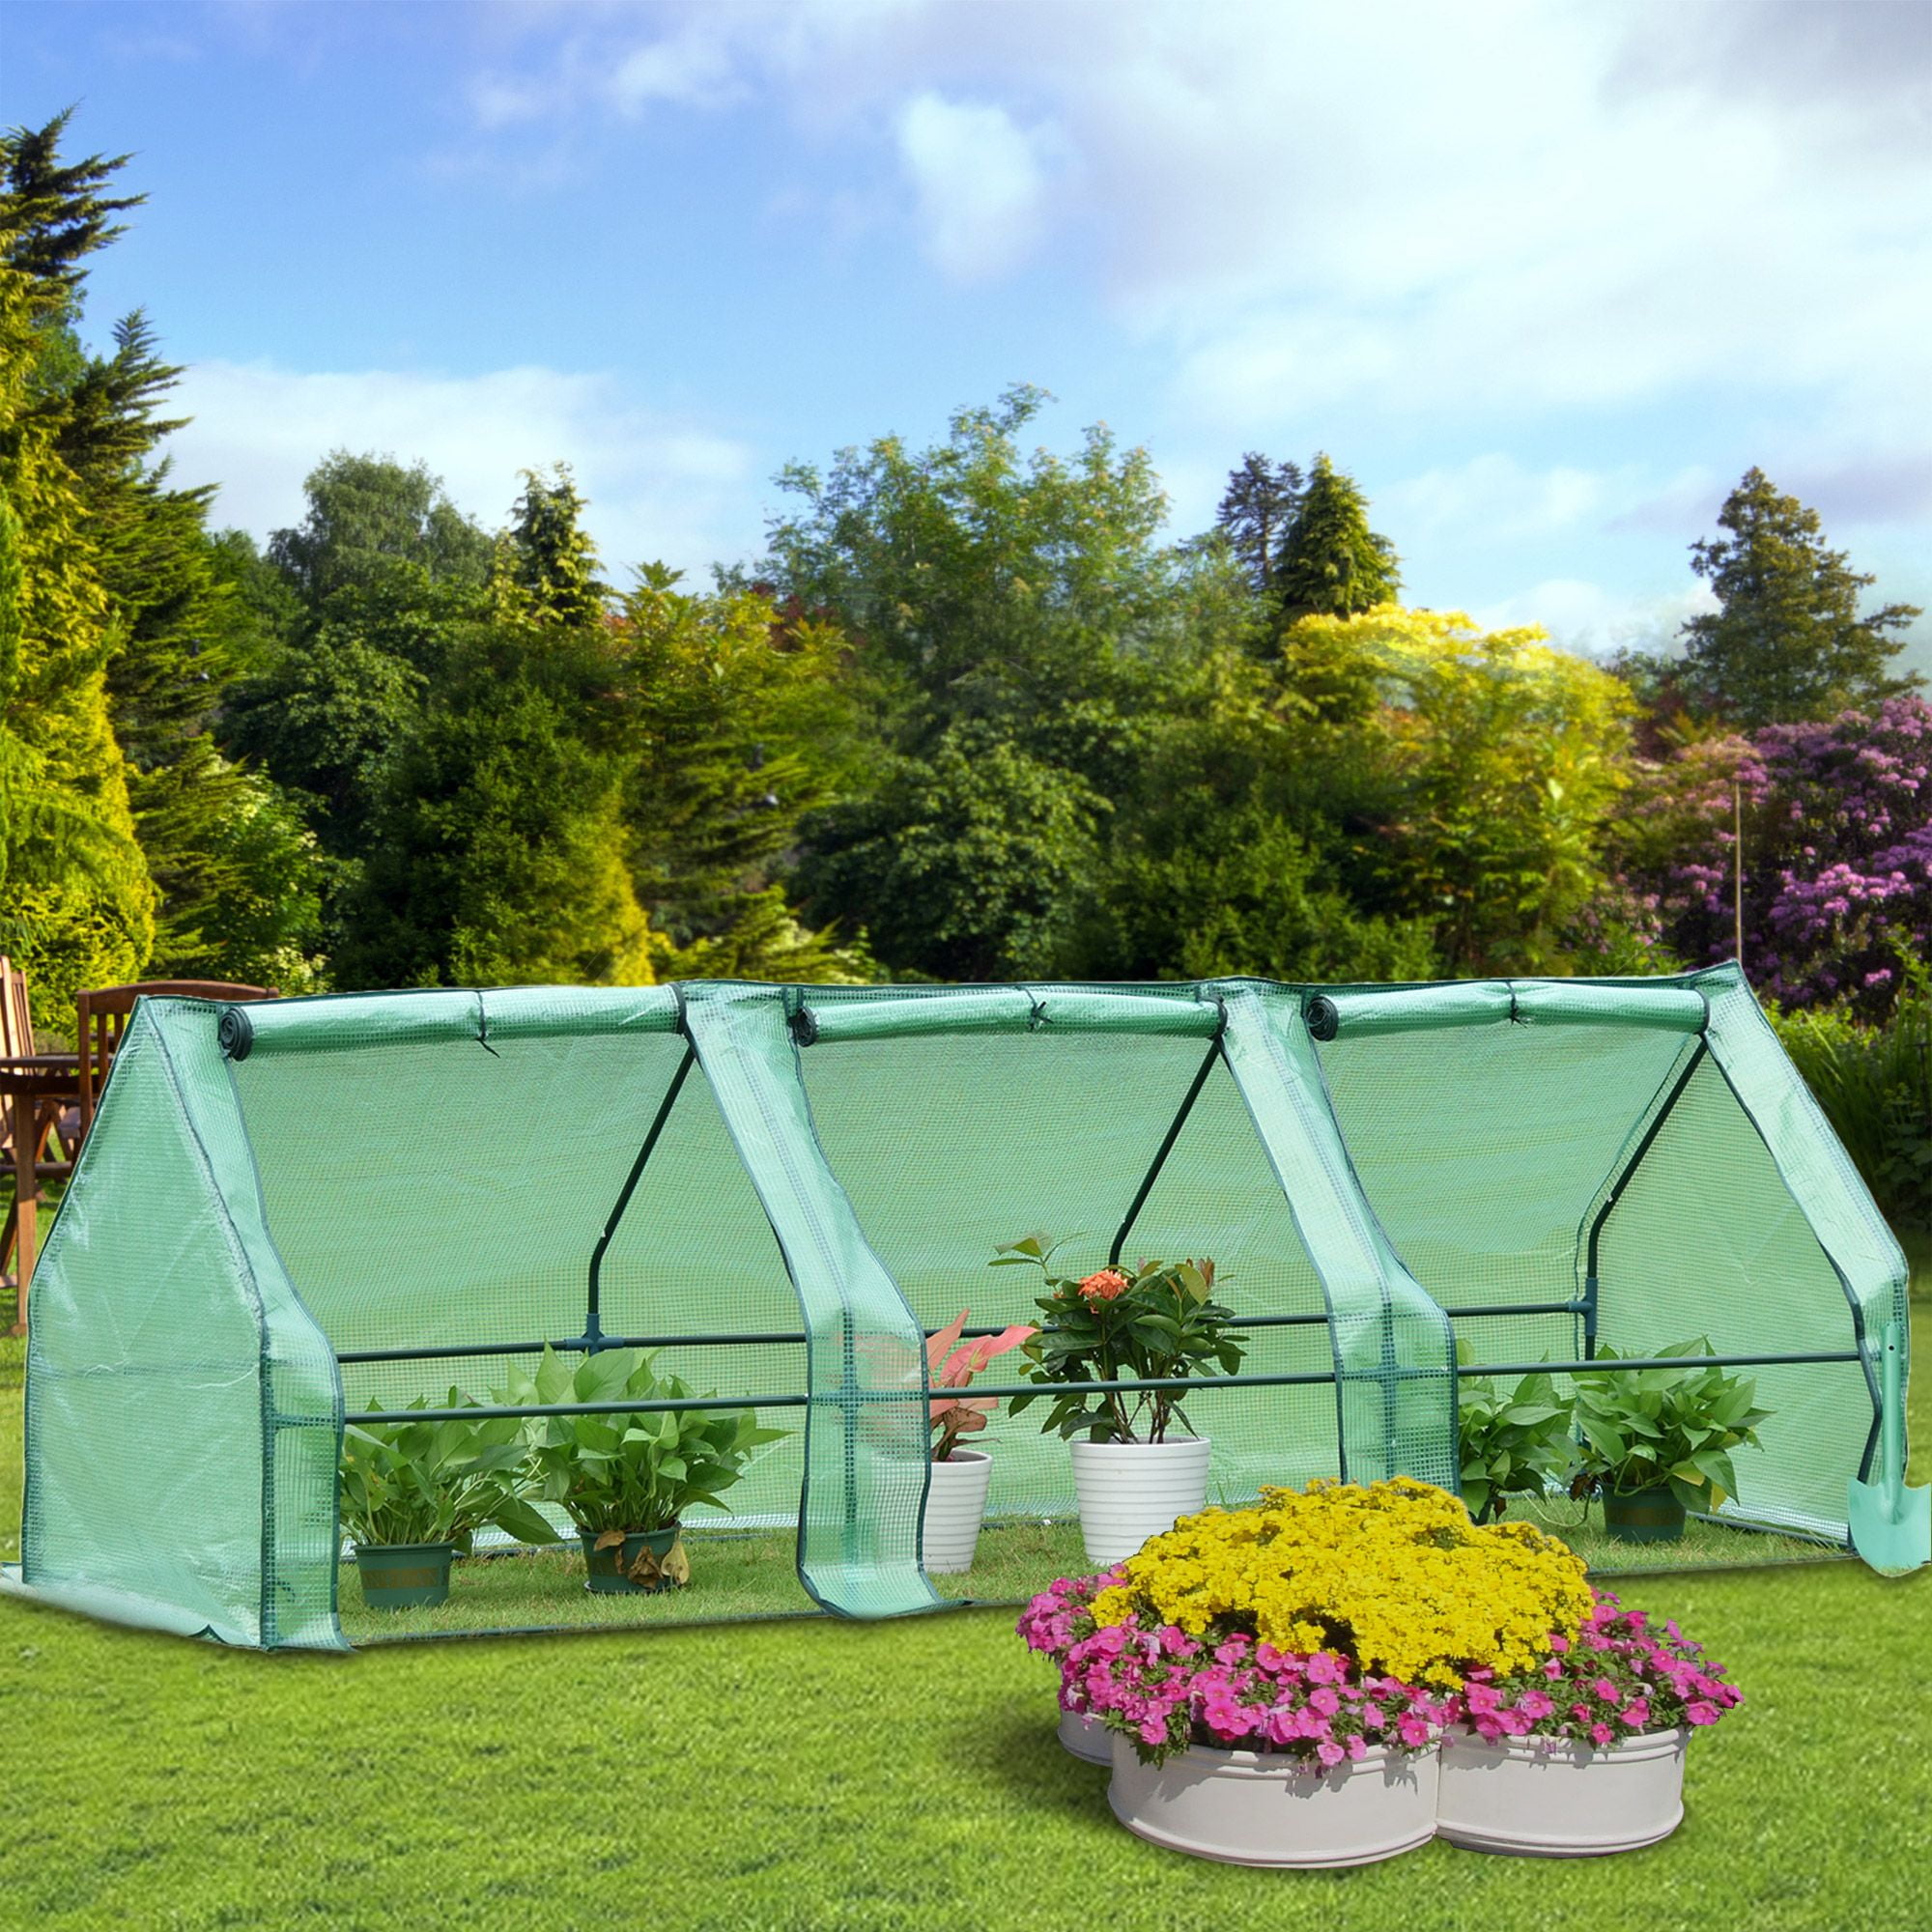 Mini Greenhouse Portable, Garden Accessory Tent with Zipper Entry Doors,  Movable Green House Canopy for Seedlings Herbs Flowers, Green, LJ1865 